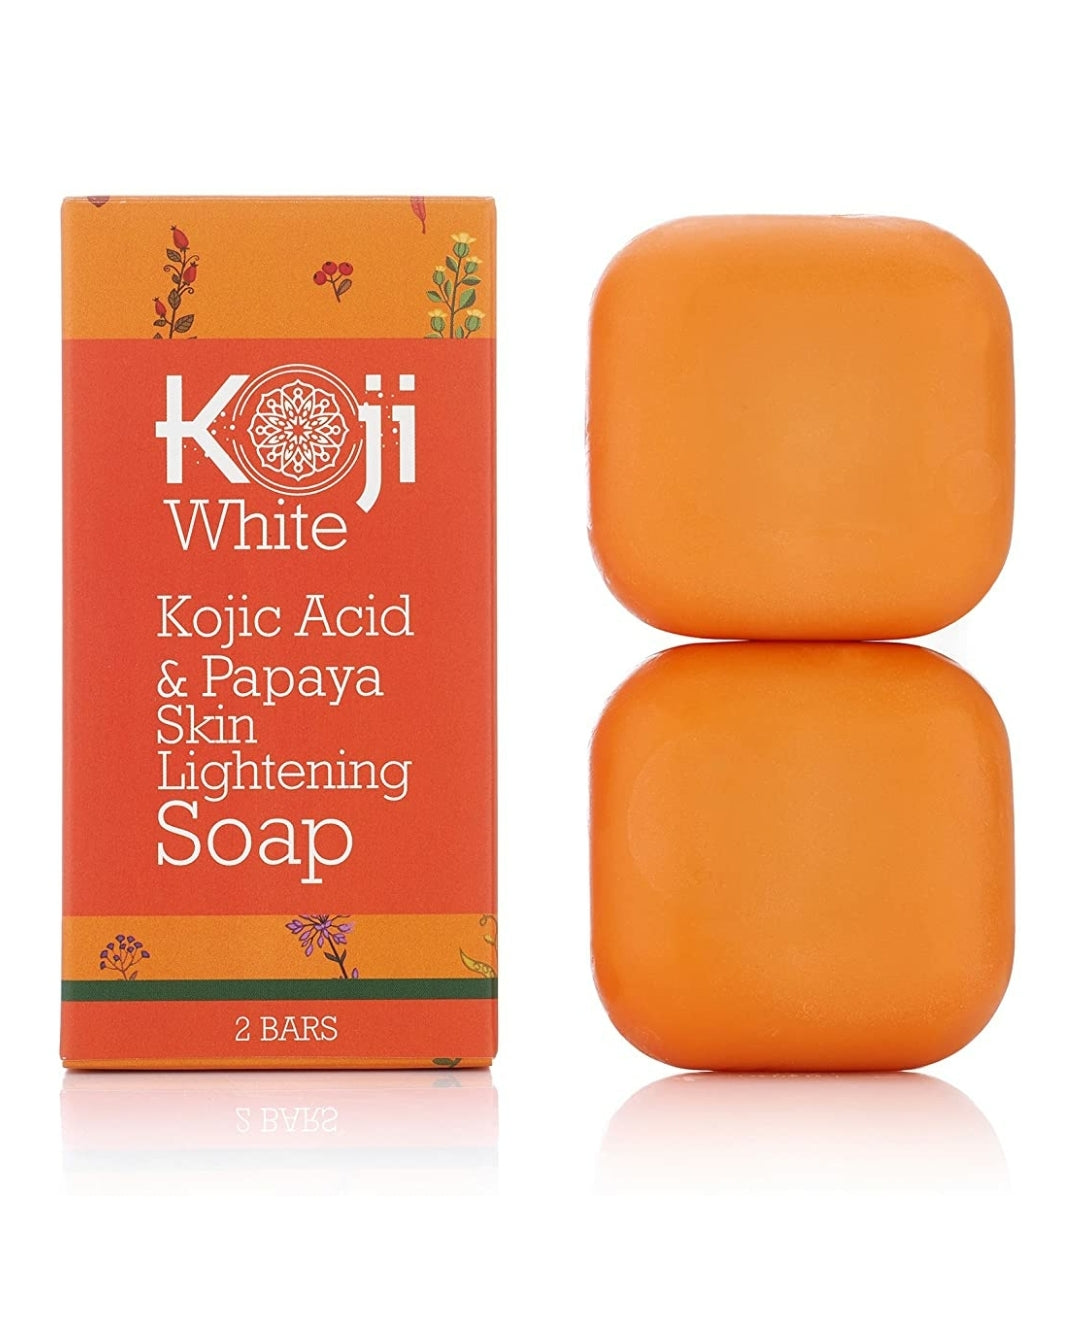 the most effective whitening soap